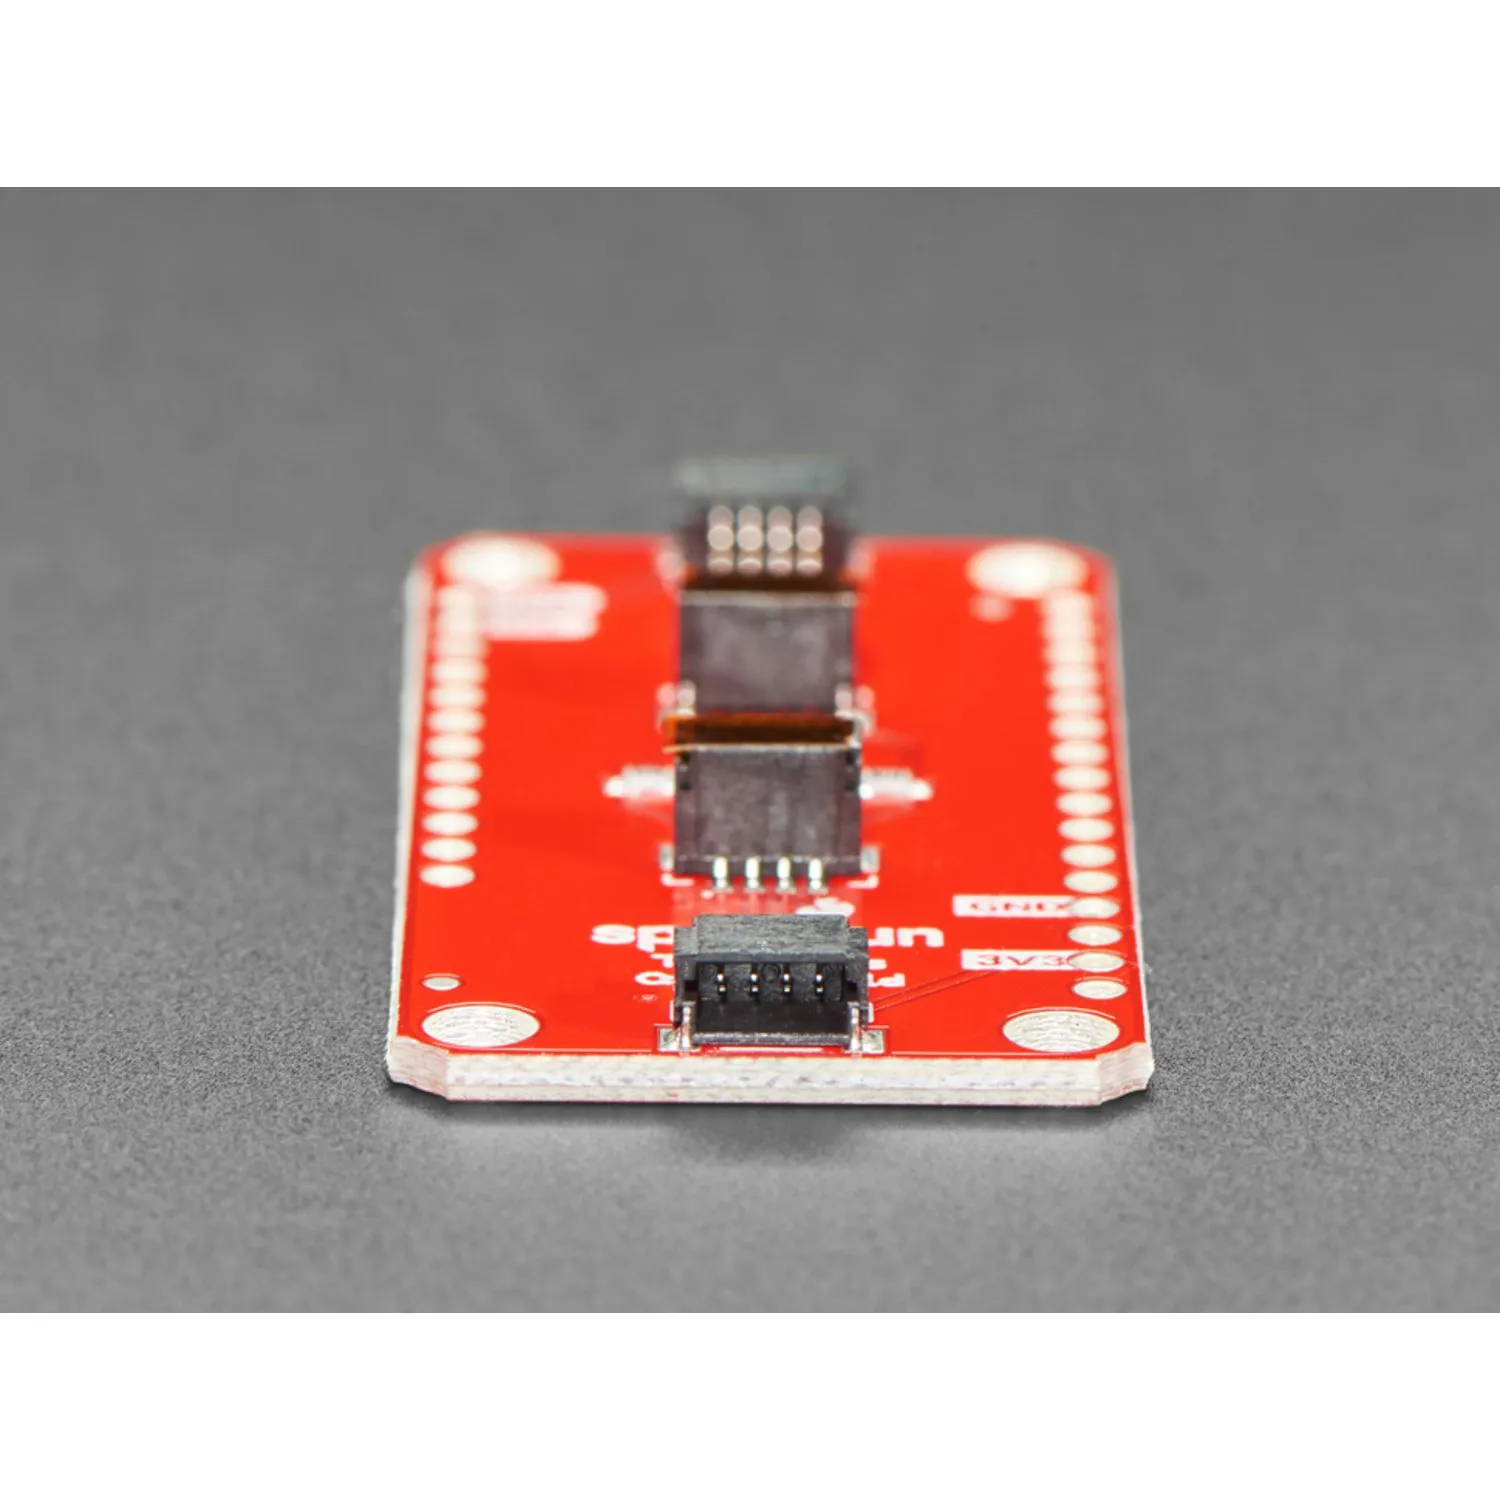 Photo of SparkFun Qwiic / Stemma QT FeatherWing (Shield for Thing Plus)